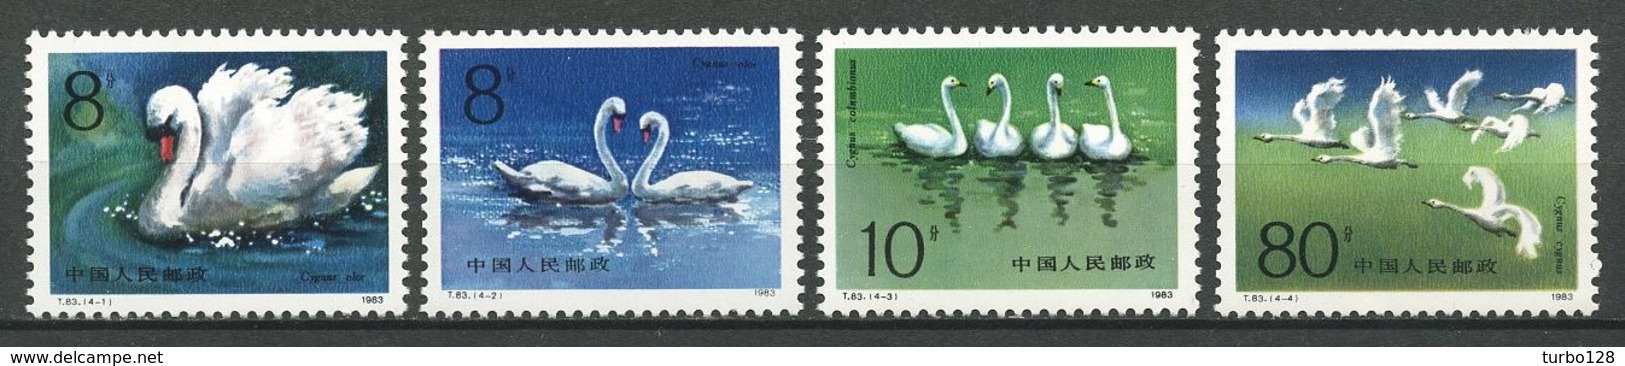 CHINE 1983 N° 2622/2625 ** Neufs MNH Superbes Faune Oiseaux Birds Cygnes Fauna Animaux - Unused Stamps